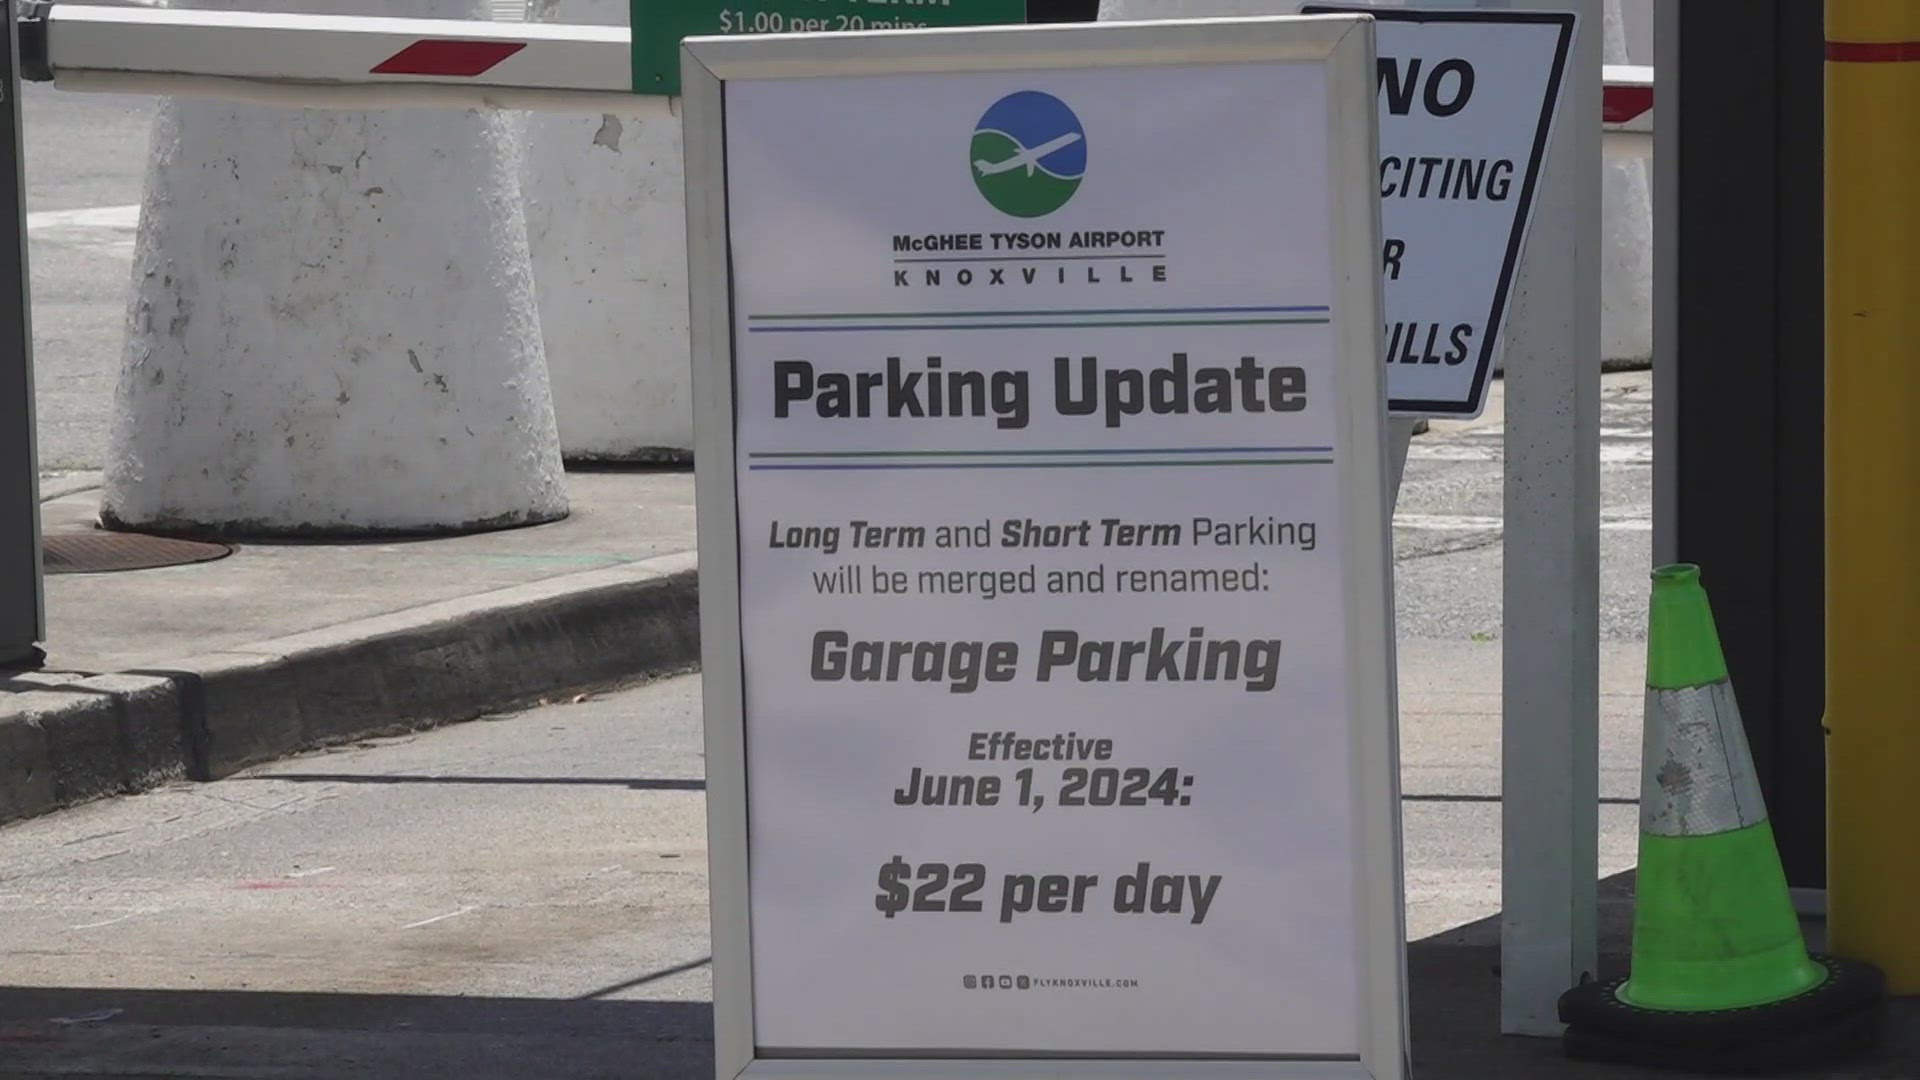 An airport spokesperson said parking needed to be restructured to prepare for peak summer travel season.